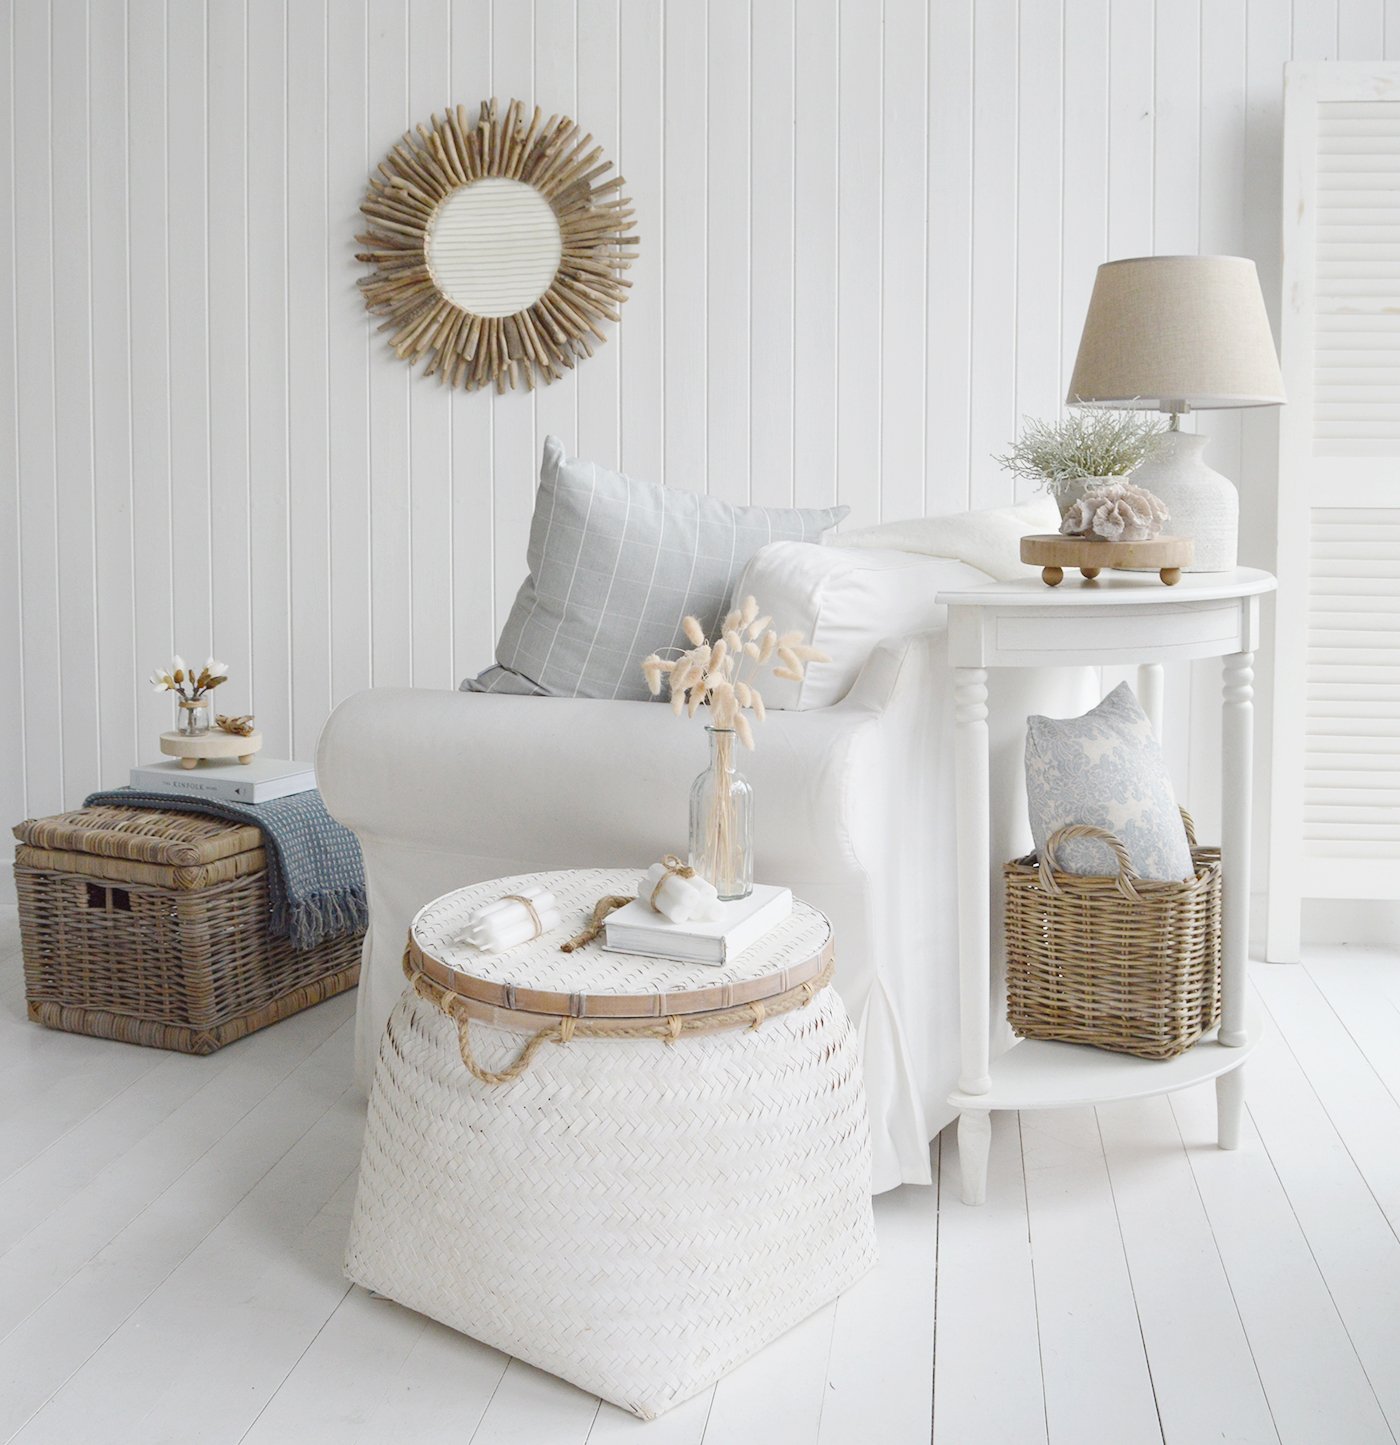 Pair your white furniture with natural elements commonly found in coastal settings. Incorporate accessories like driftwood, seashells, sisal rugs, or jute baskets to create a harmonious balance between the crispness of the white furniture and the organic textures of the coastal environment